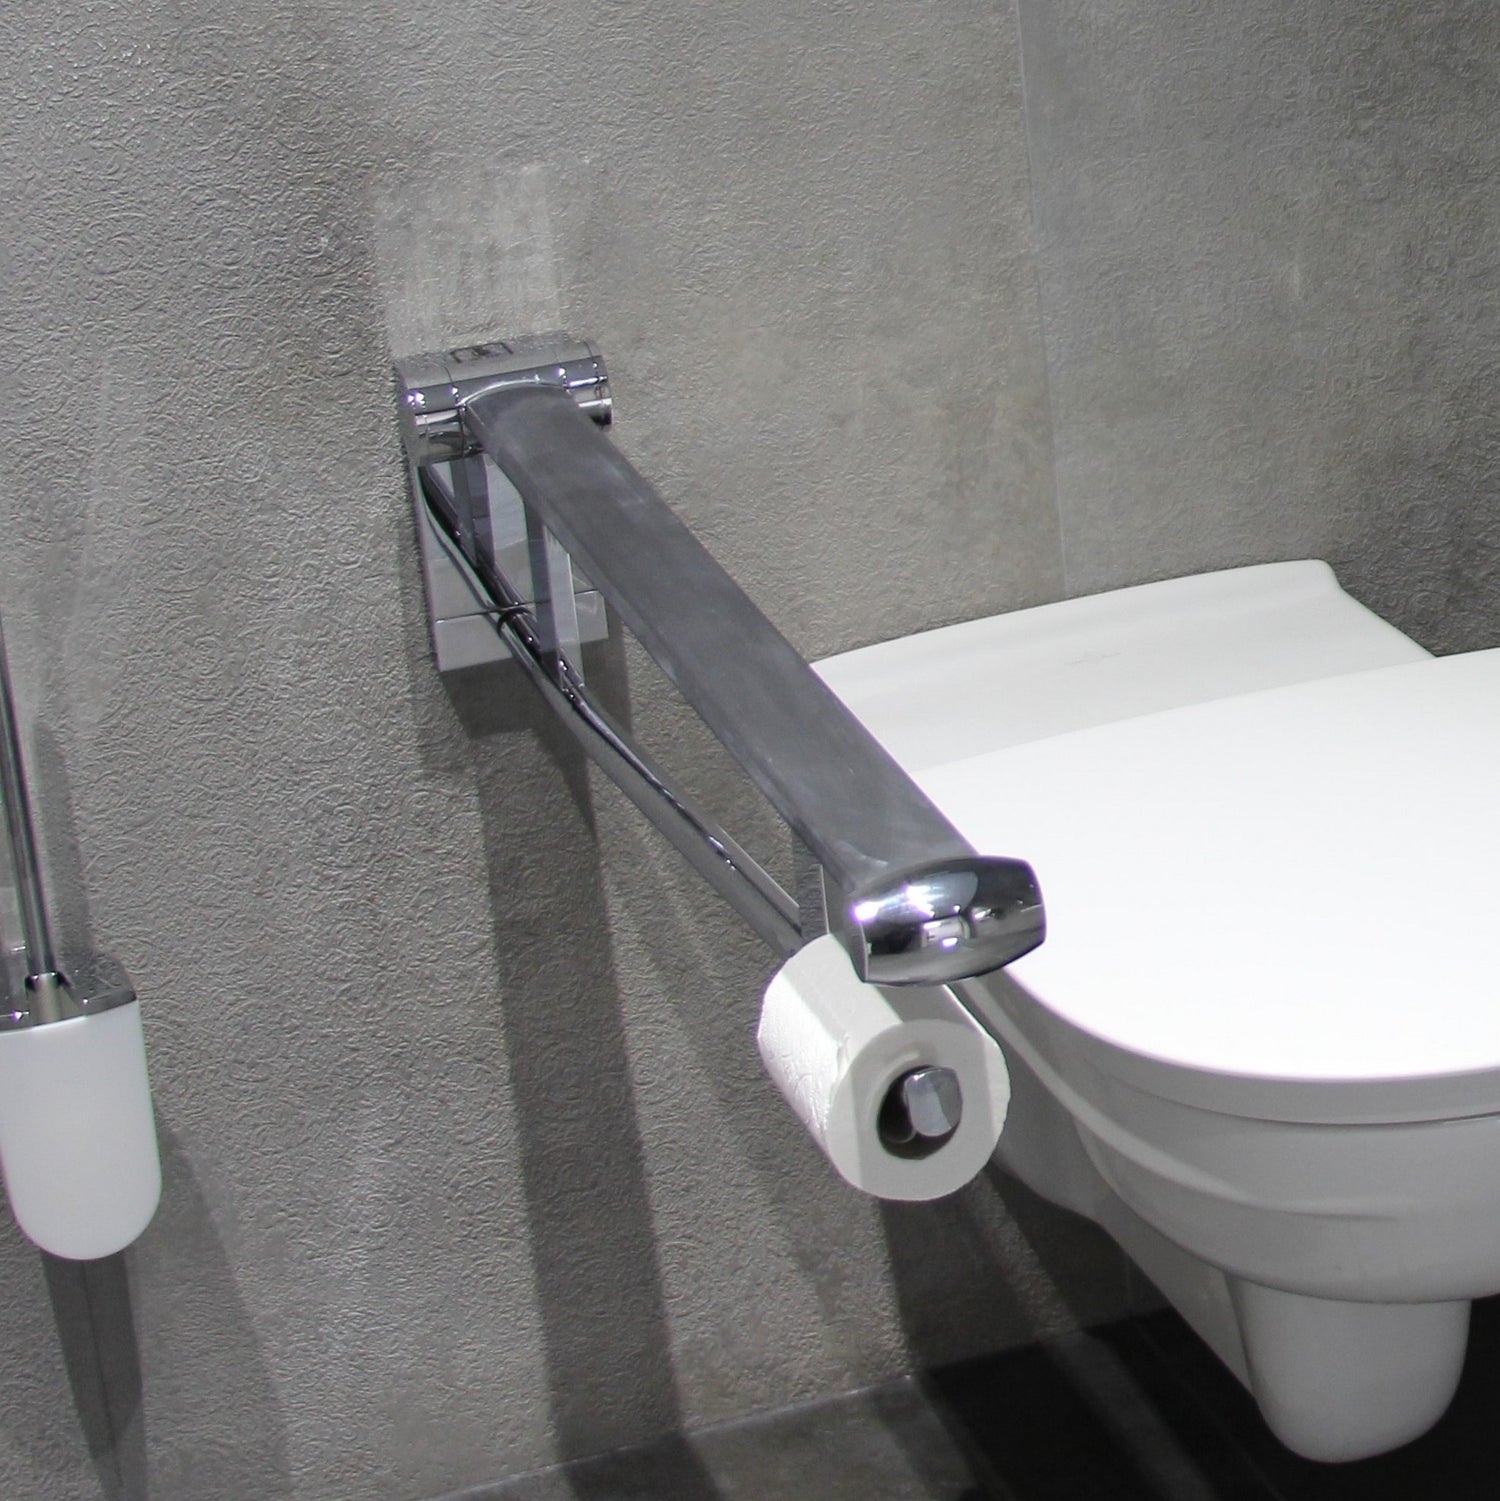 Keuco Plan Care Drop down Supporting Rail for Washbasin - 850mm